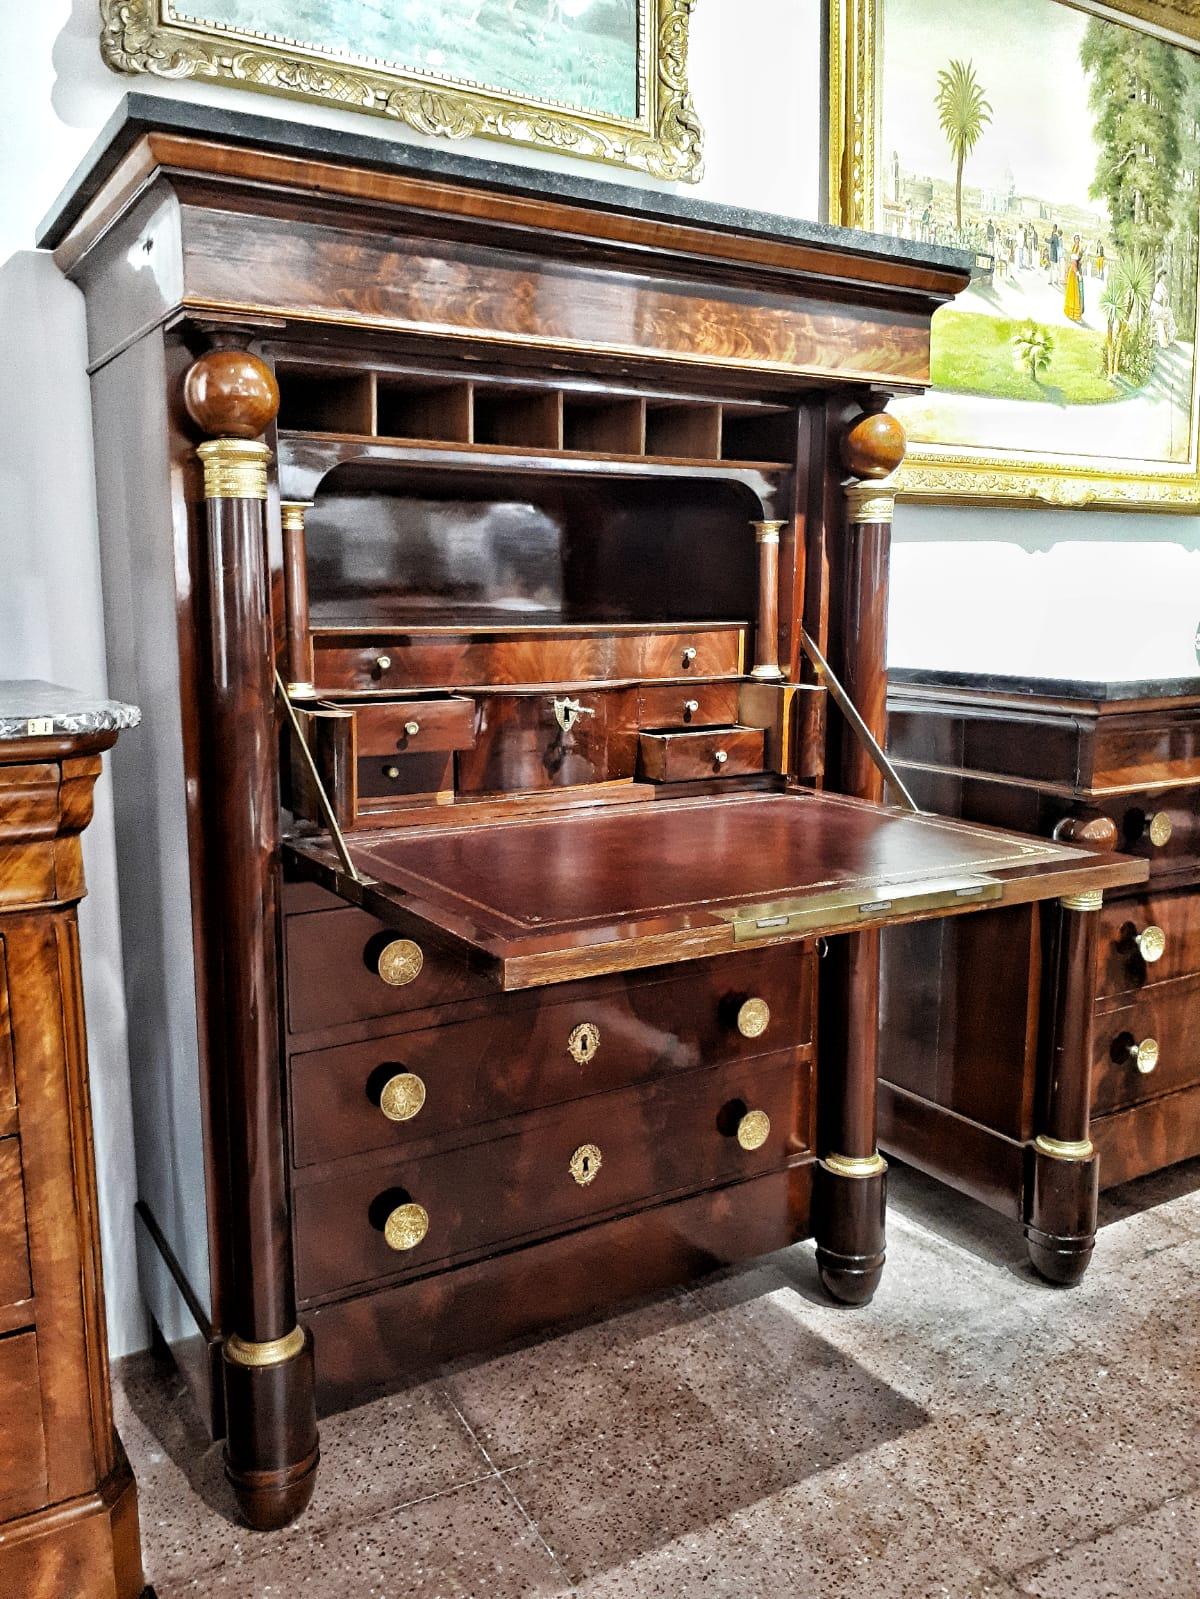 Wonderful French empire secretaire, early 19th century. Flame mahogany, Belgian black marble, leather, bronze details, with two working keys and two secret drawers.

Secretaire of excellent quality, made of mahogany wood adorned with bronze, with